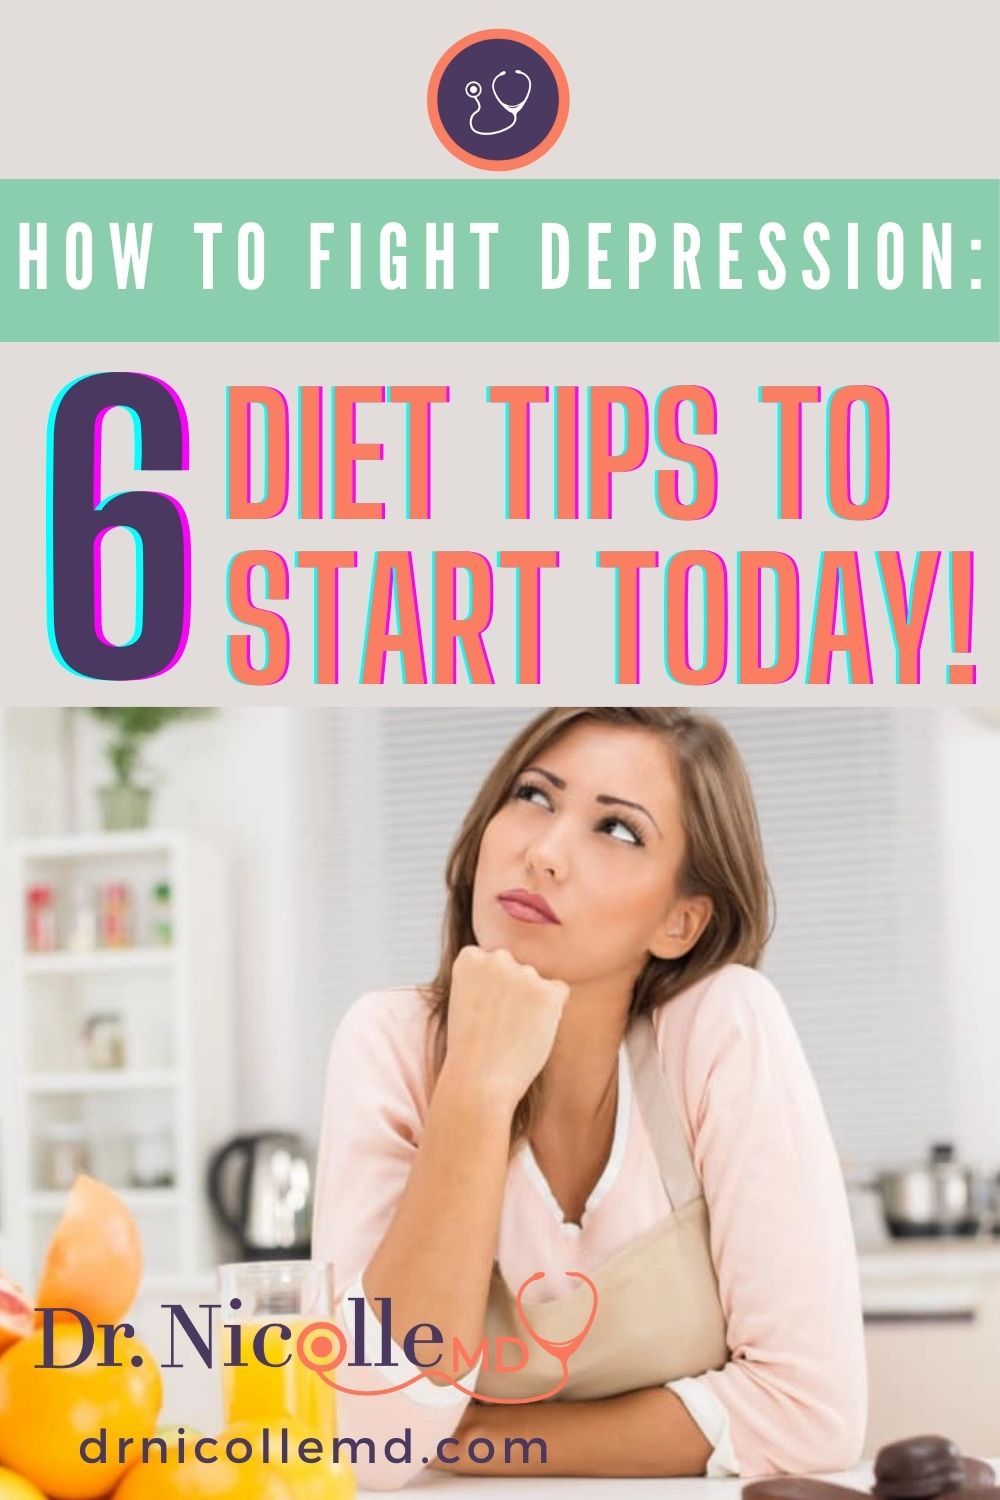 How To Fight Depression: 6 Diet Tips To Start Today!